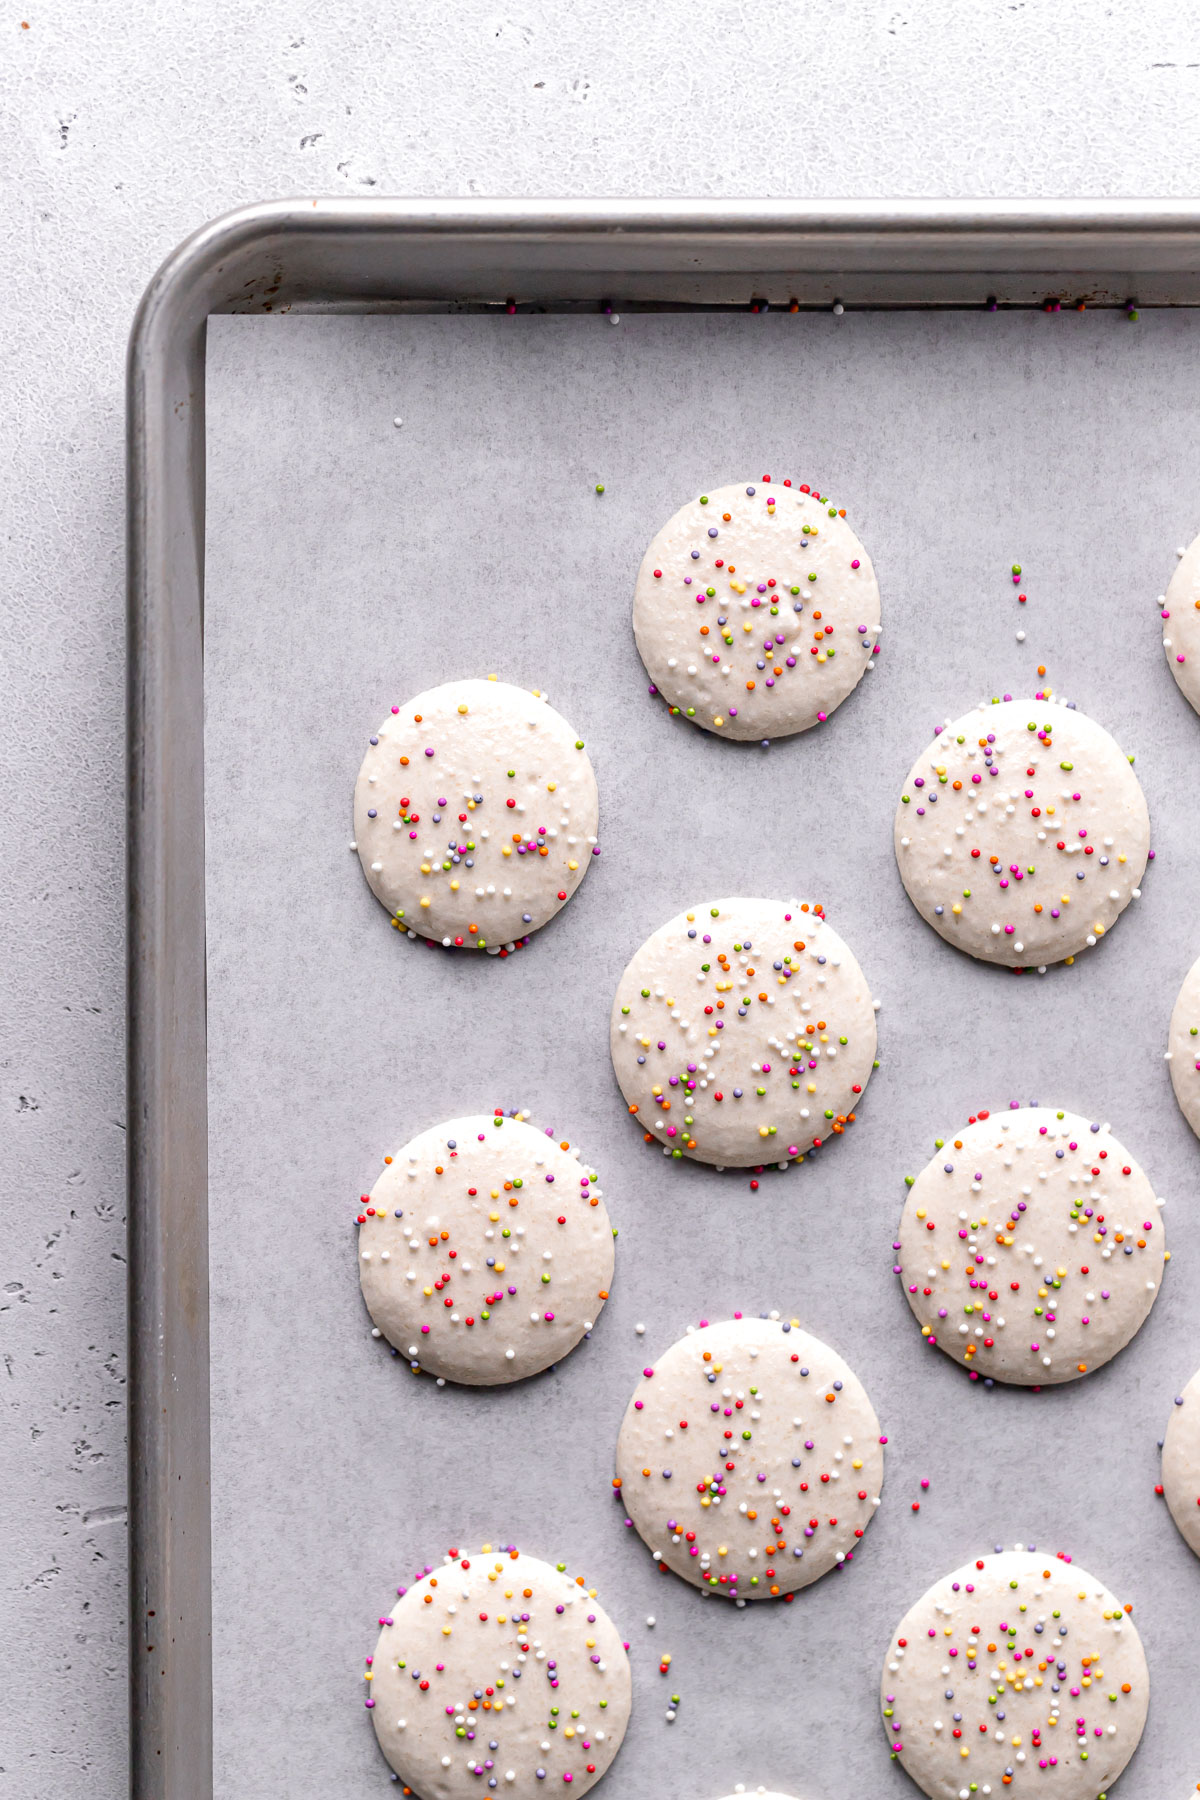 vanilla macaron batter piped onto parchment lined baking sheet and topped with rainbow sprinkles.